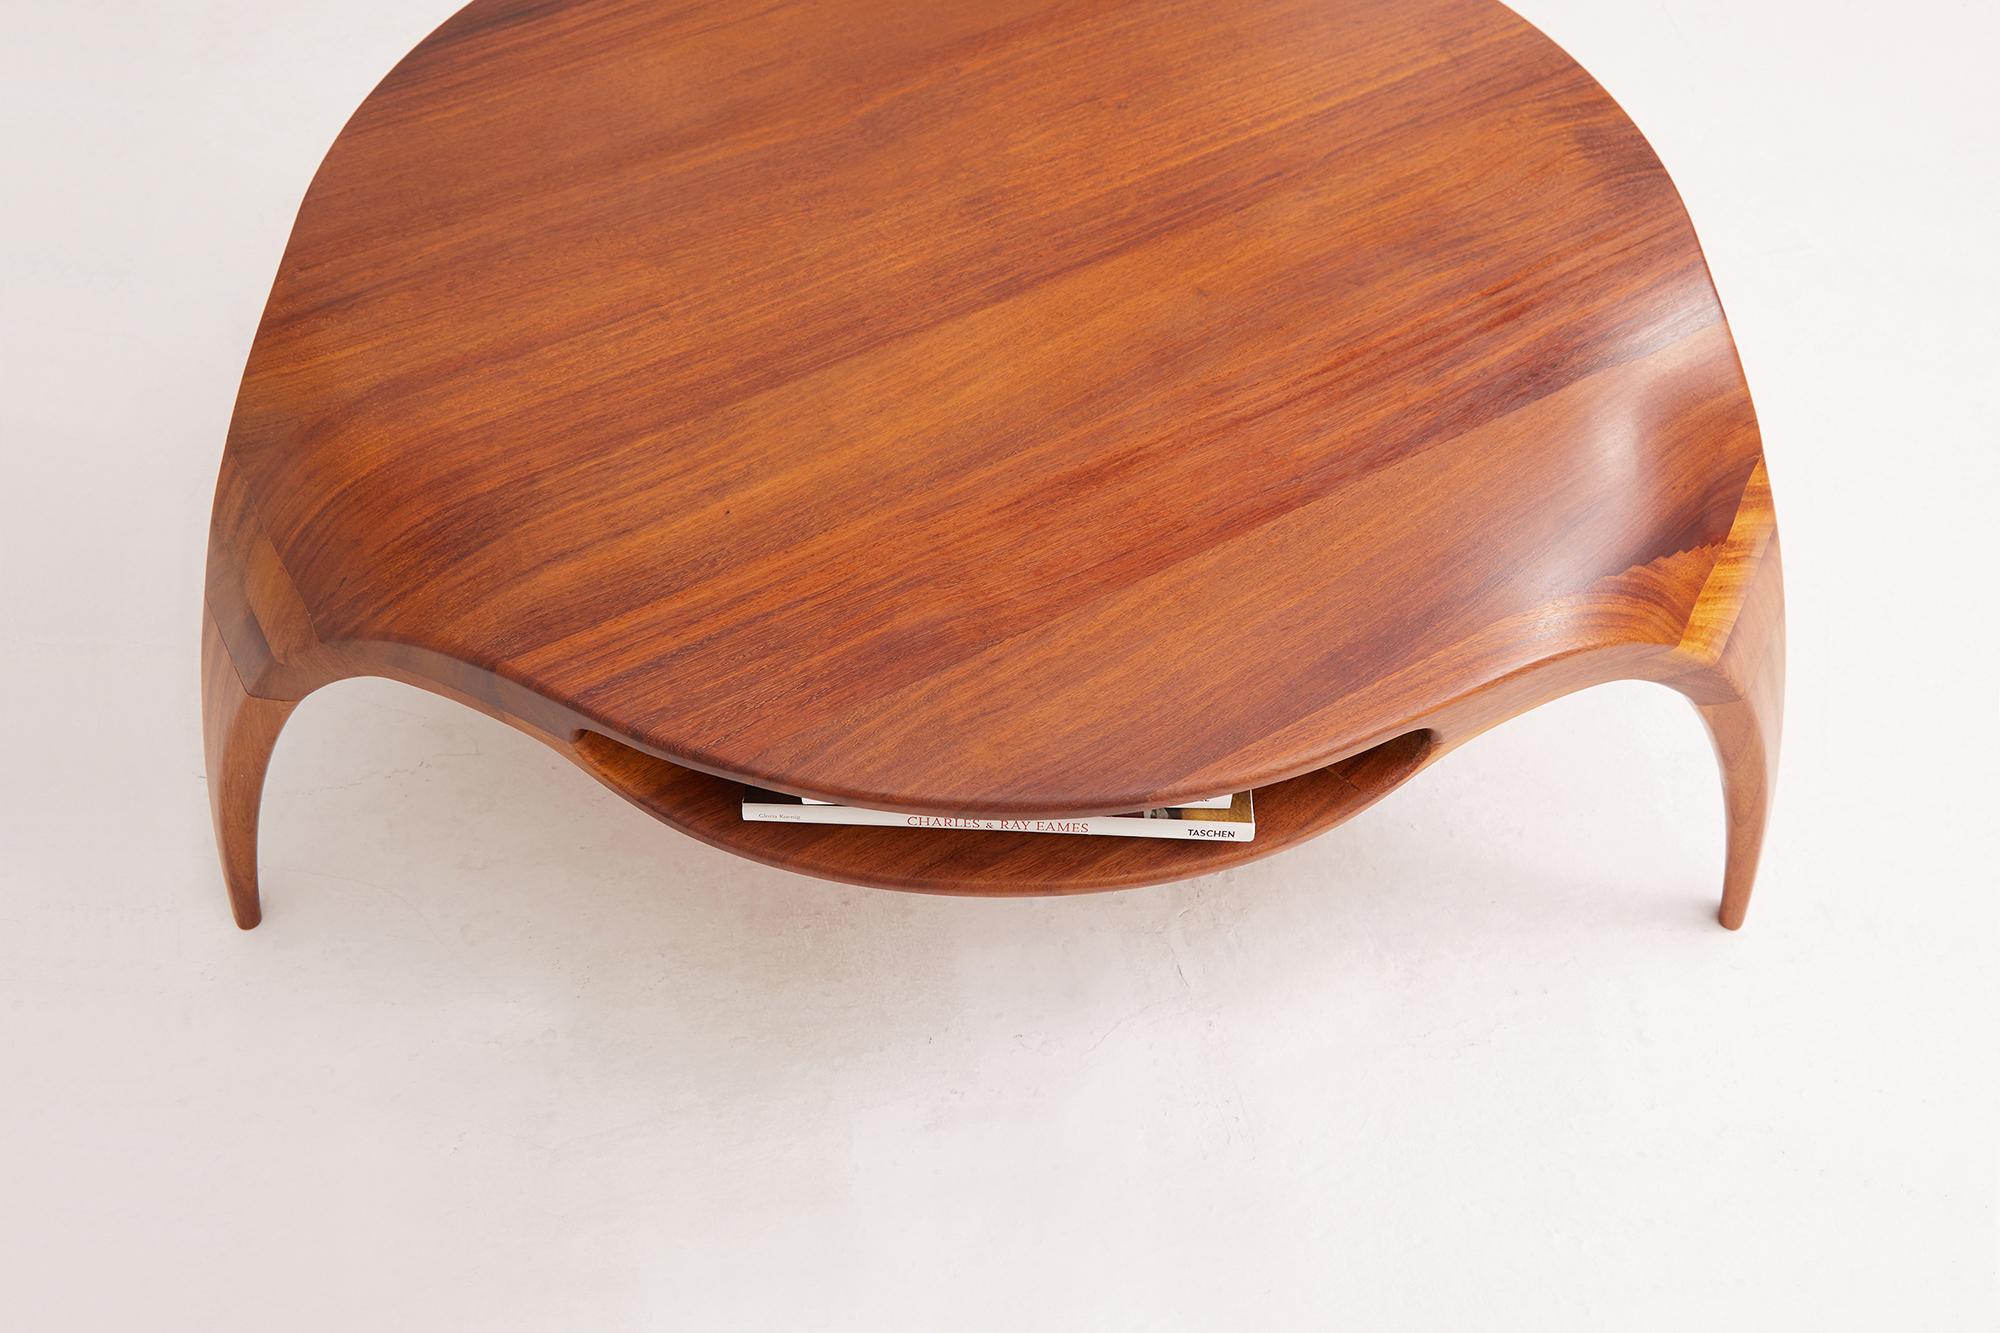 Contemporary Sankao Coffee Table in Iroko Wood by Henka Lab